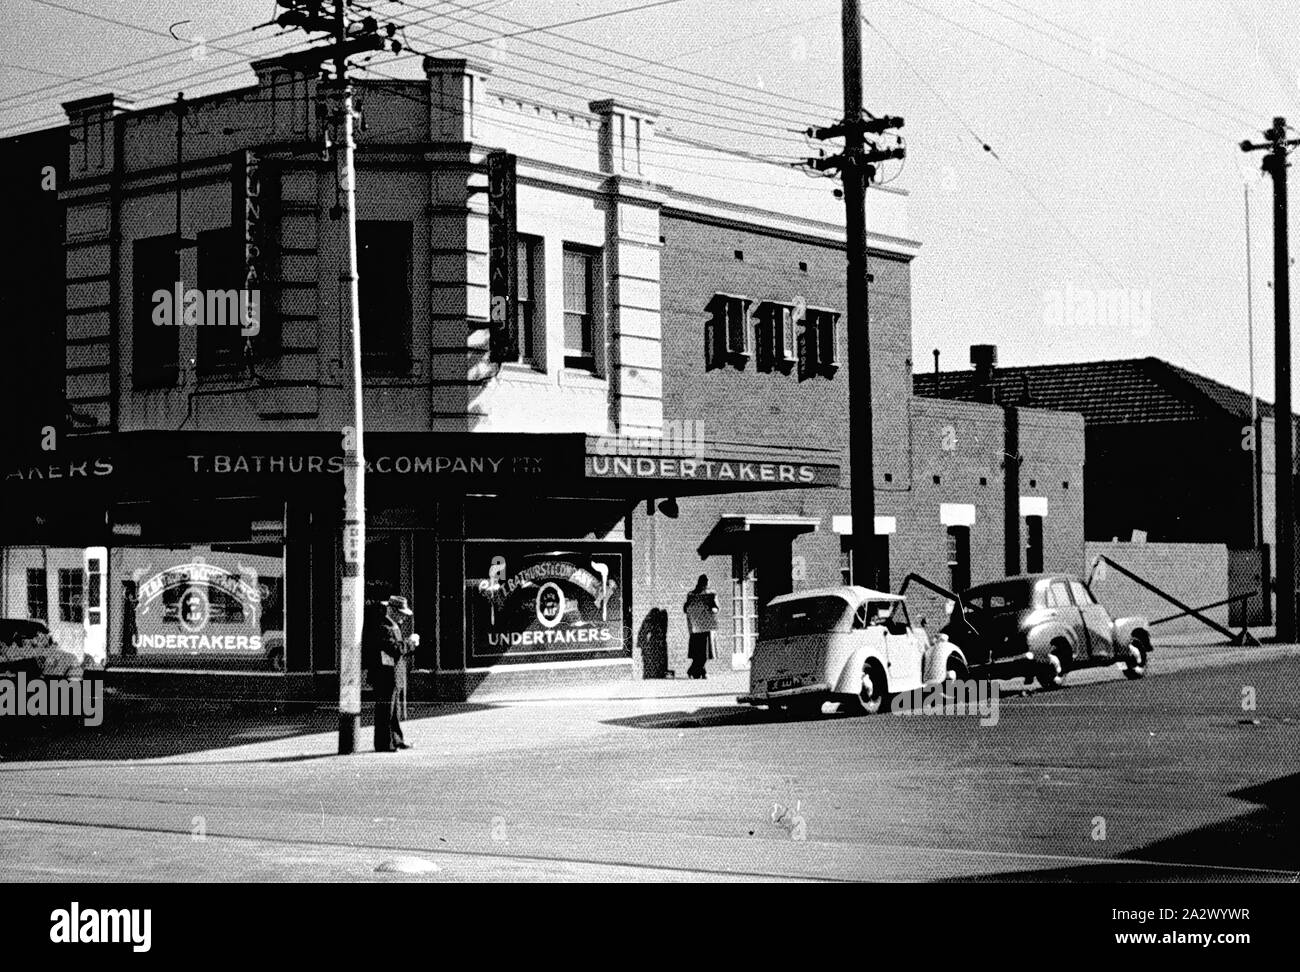 Negative - Caulfield South, Victoria, circa 1955, T. Bathurst & Company Proprietary Limited, Undertakers. There are cars parked by the side of the road and tram tracks in the foreground Stock Photo